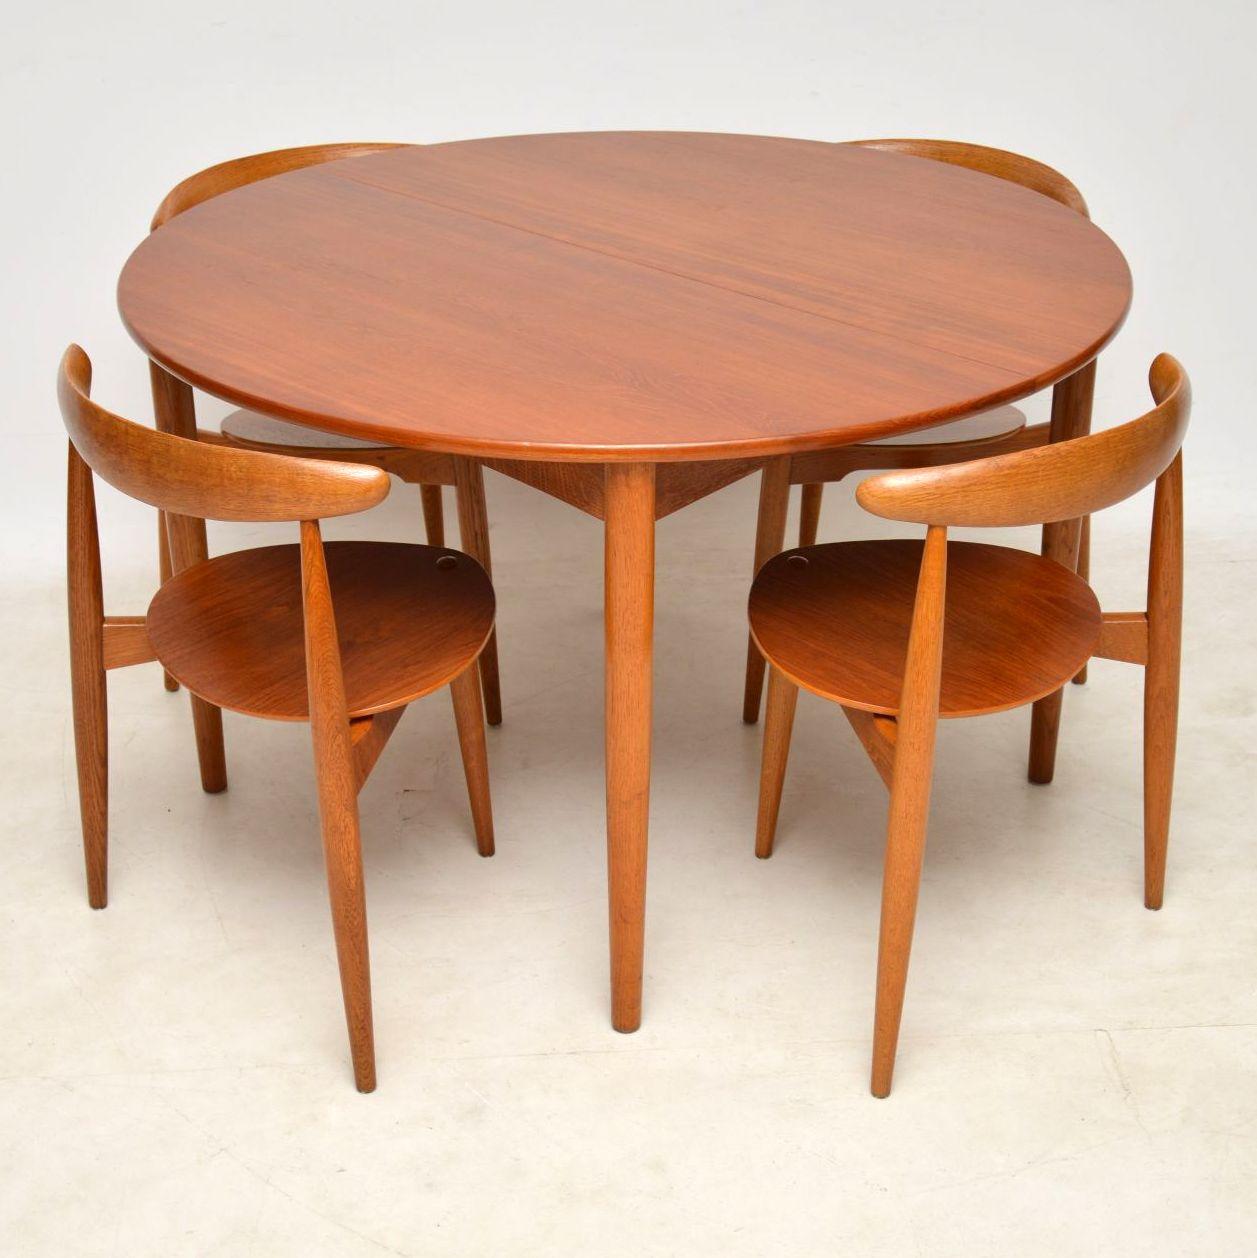 A stunning and very rare vintage dining suite designed by the famous Danish designer Hans Wegner, this was made in Denmark, circa 1950s-1960s. The chairs are often known as the ‘heart’ chairs due to the shape of the seats, they have a stunning three